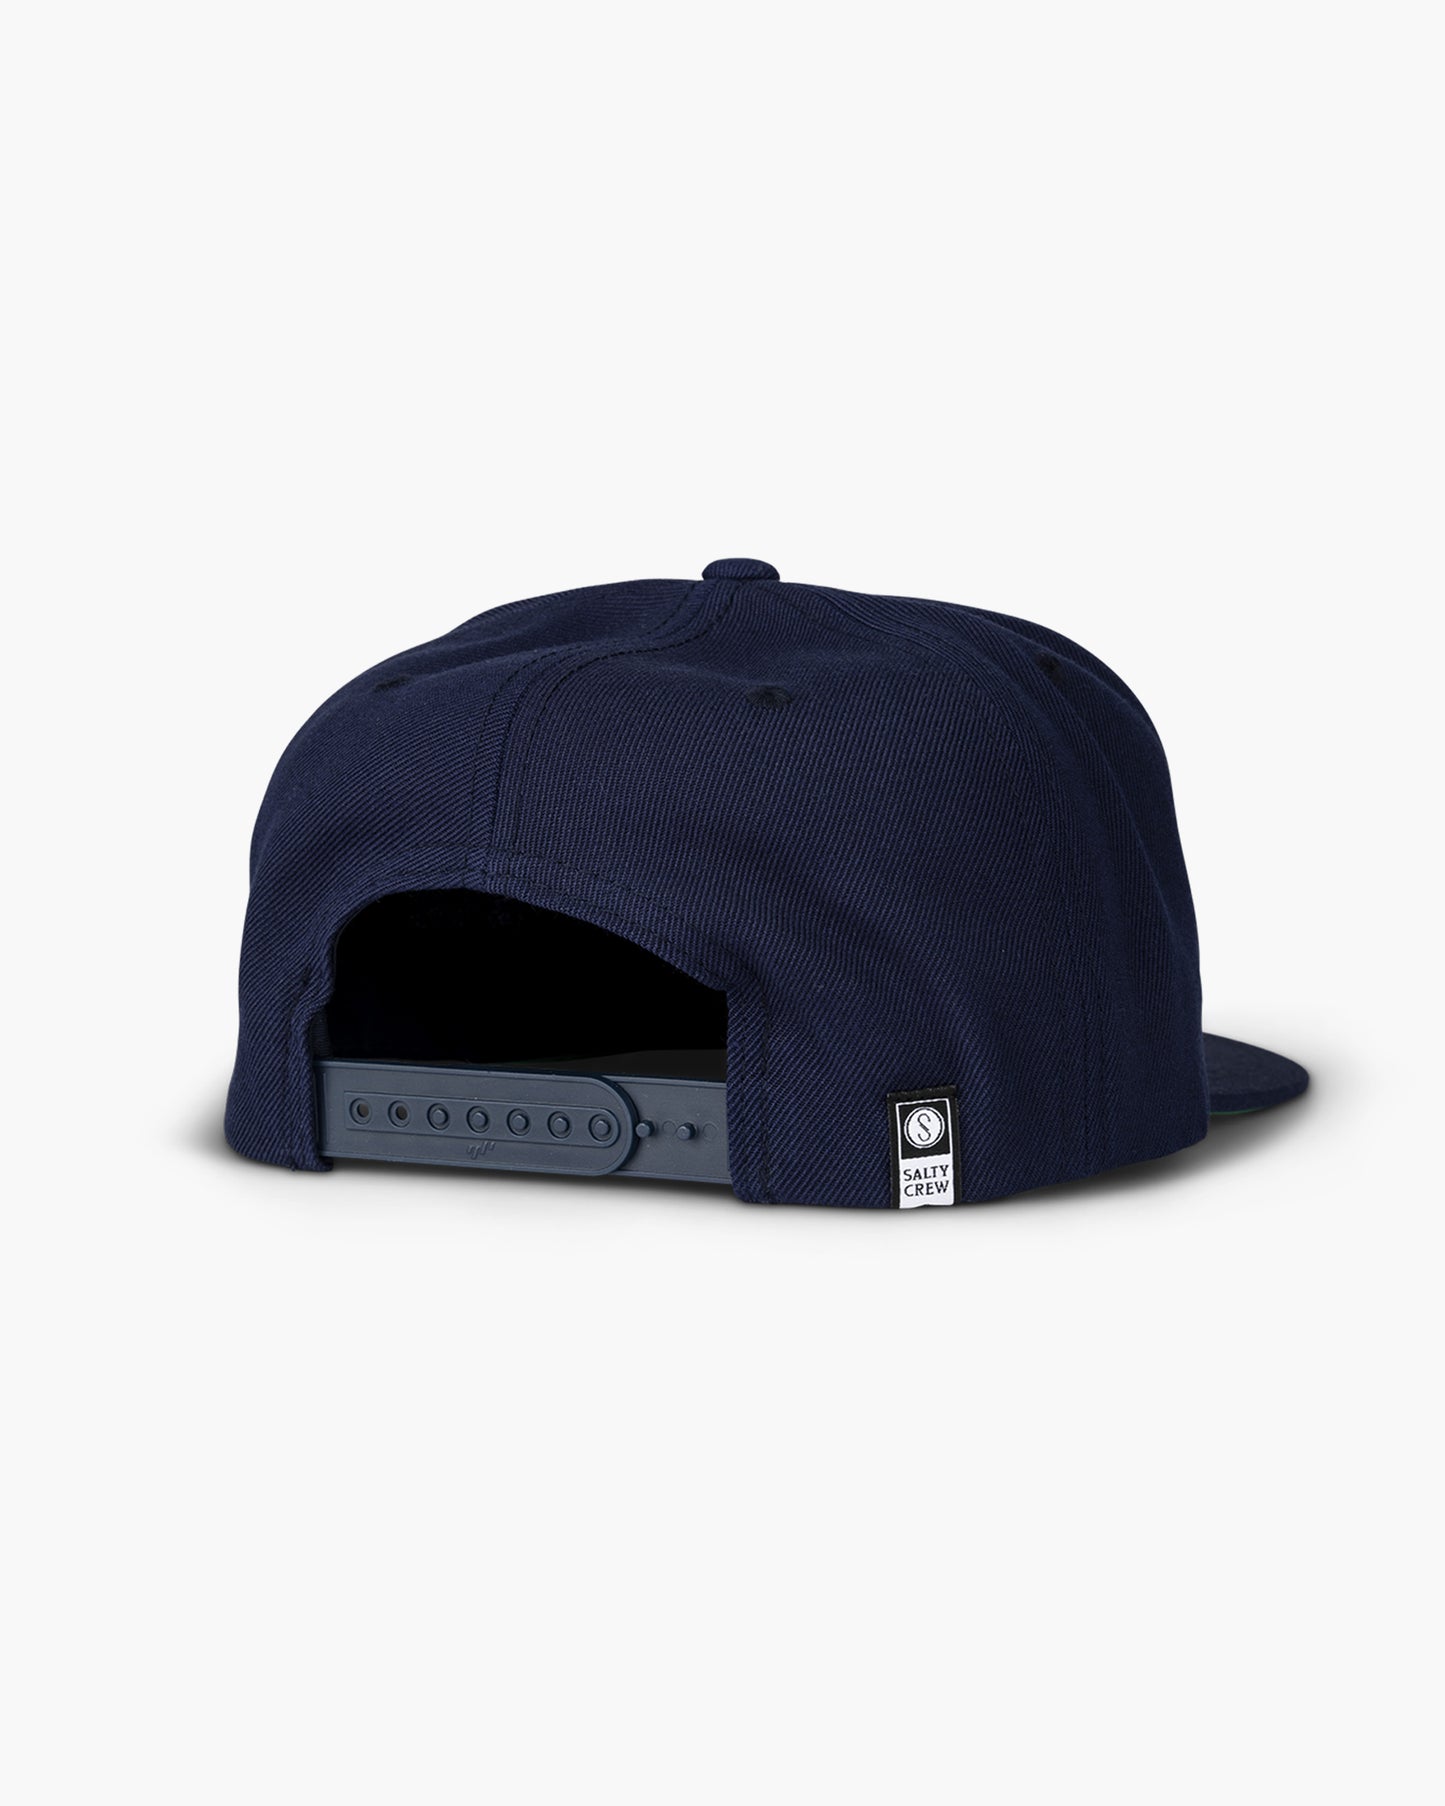 back view of Big Blue Navy 6 Panel